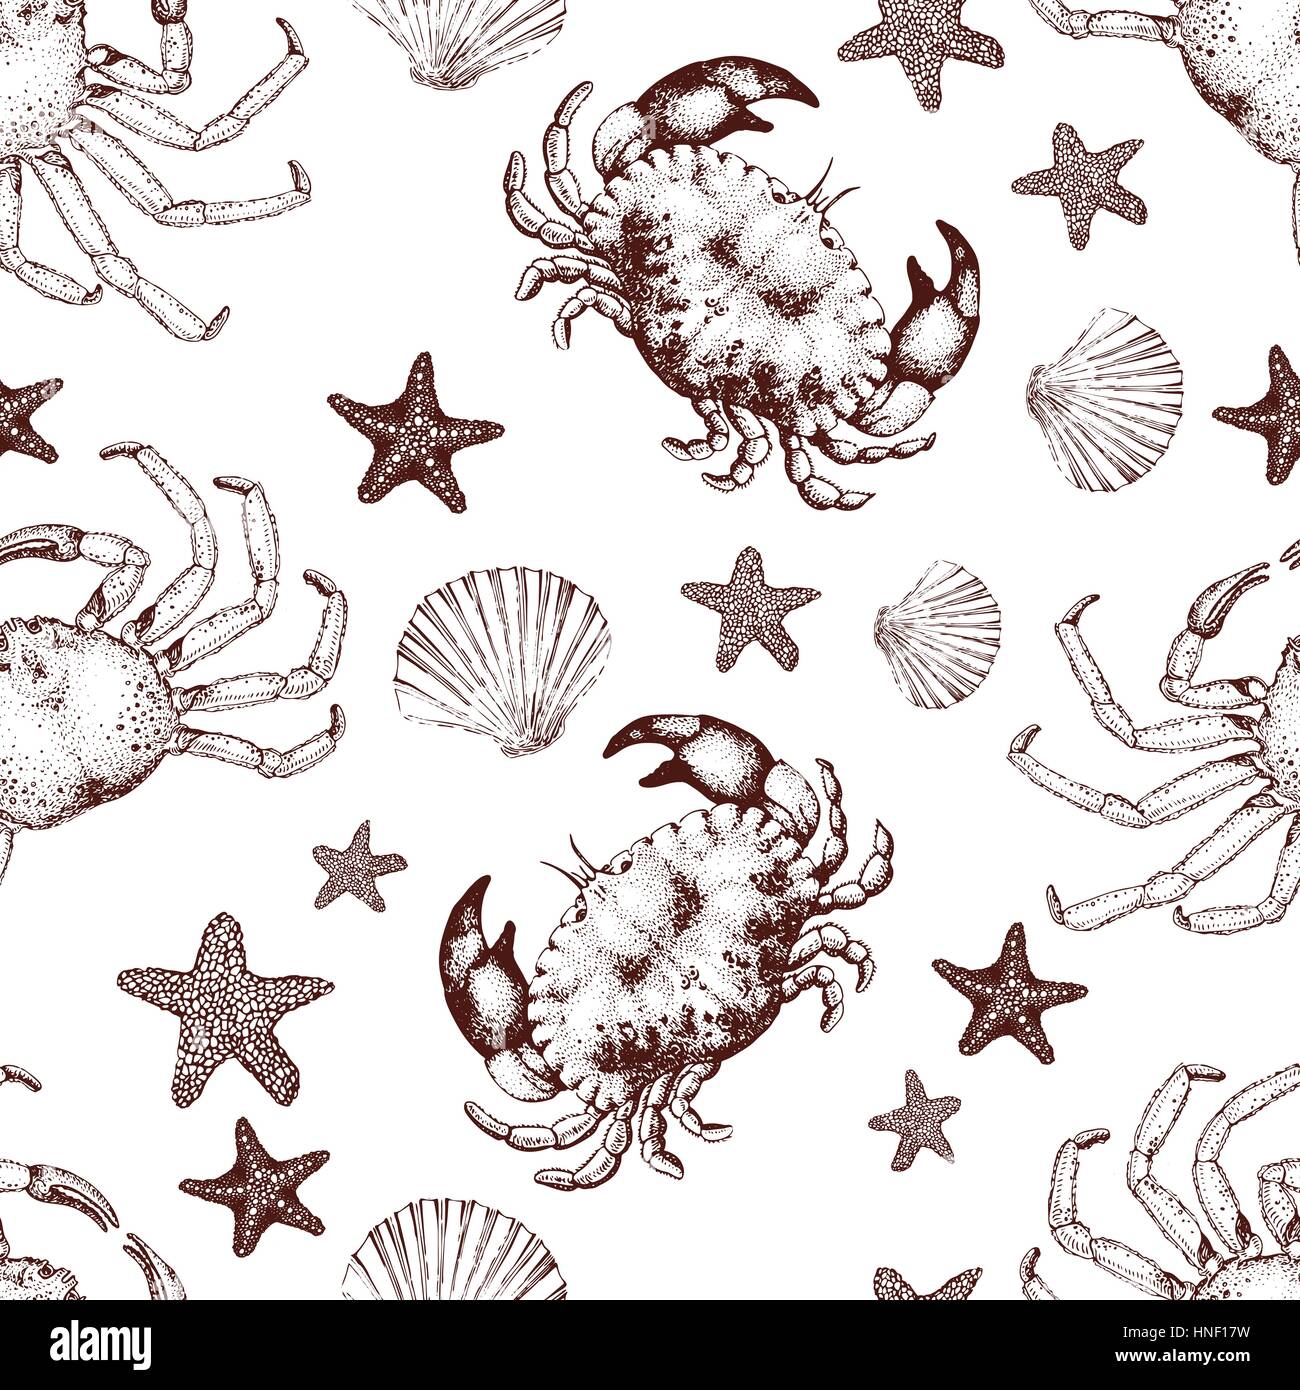 Vector seafood seamless pattern with crabs. Retro hand drawn lillustration. Stock Vector